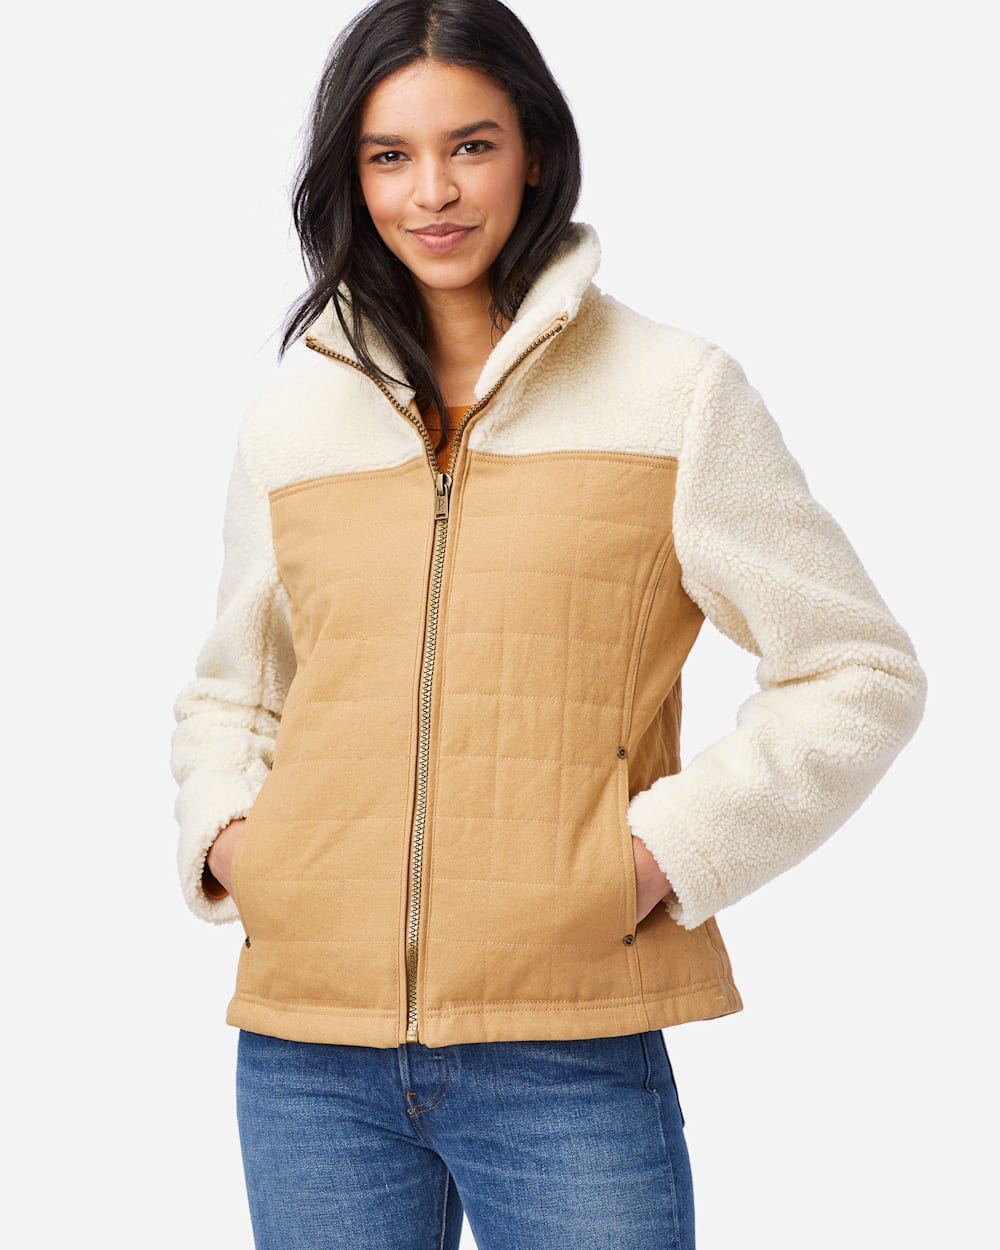 ALTERNATE VIEW OF WOMEN'S SALIDA CANVAS SHERPA JACKET IN LIGHT TAN/IVORY image number 4